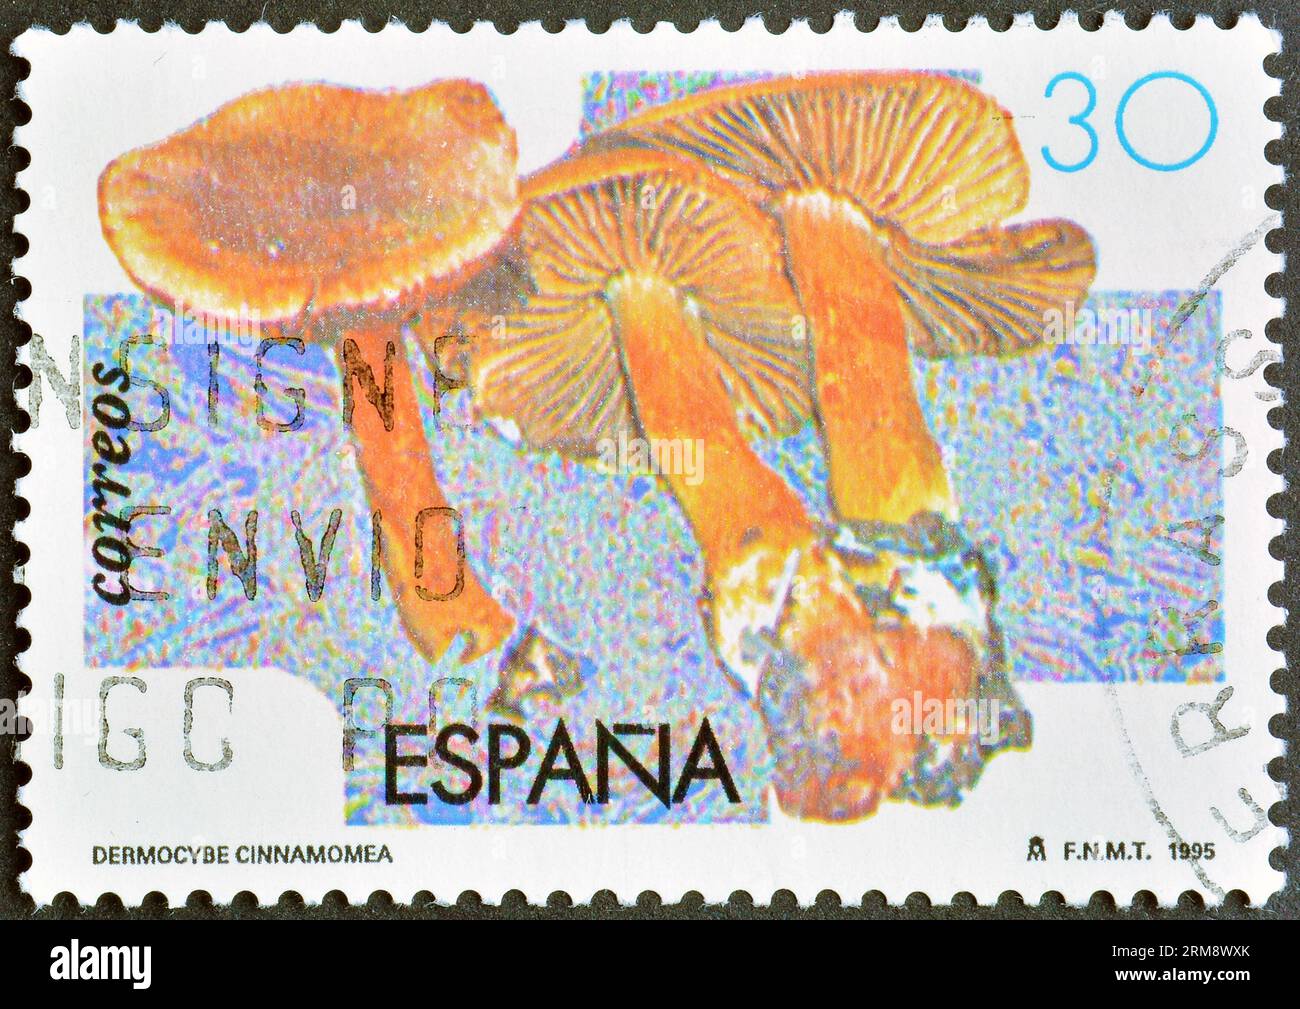 Cancelled postage stamp printed by Spain, that shows Cinnamon Webcap Mushroom (Dermocybe cinnamomea), circa 1995. Stock Photo